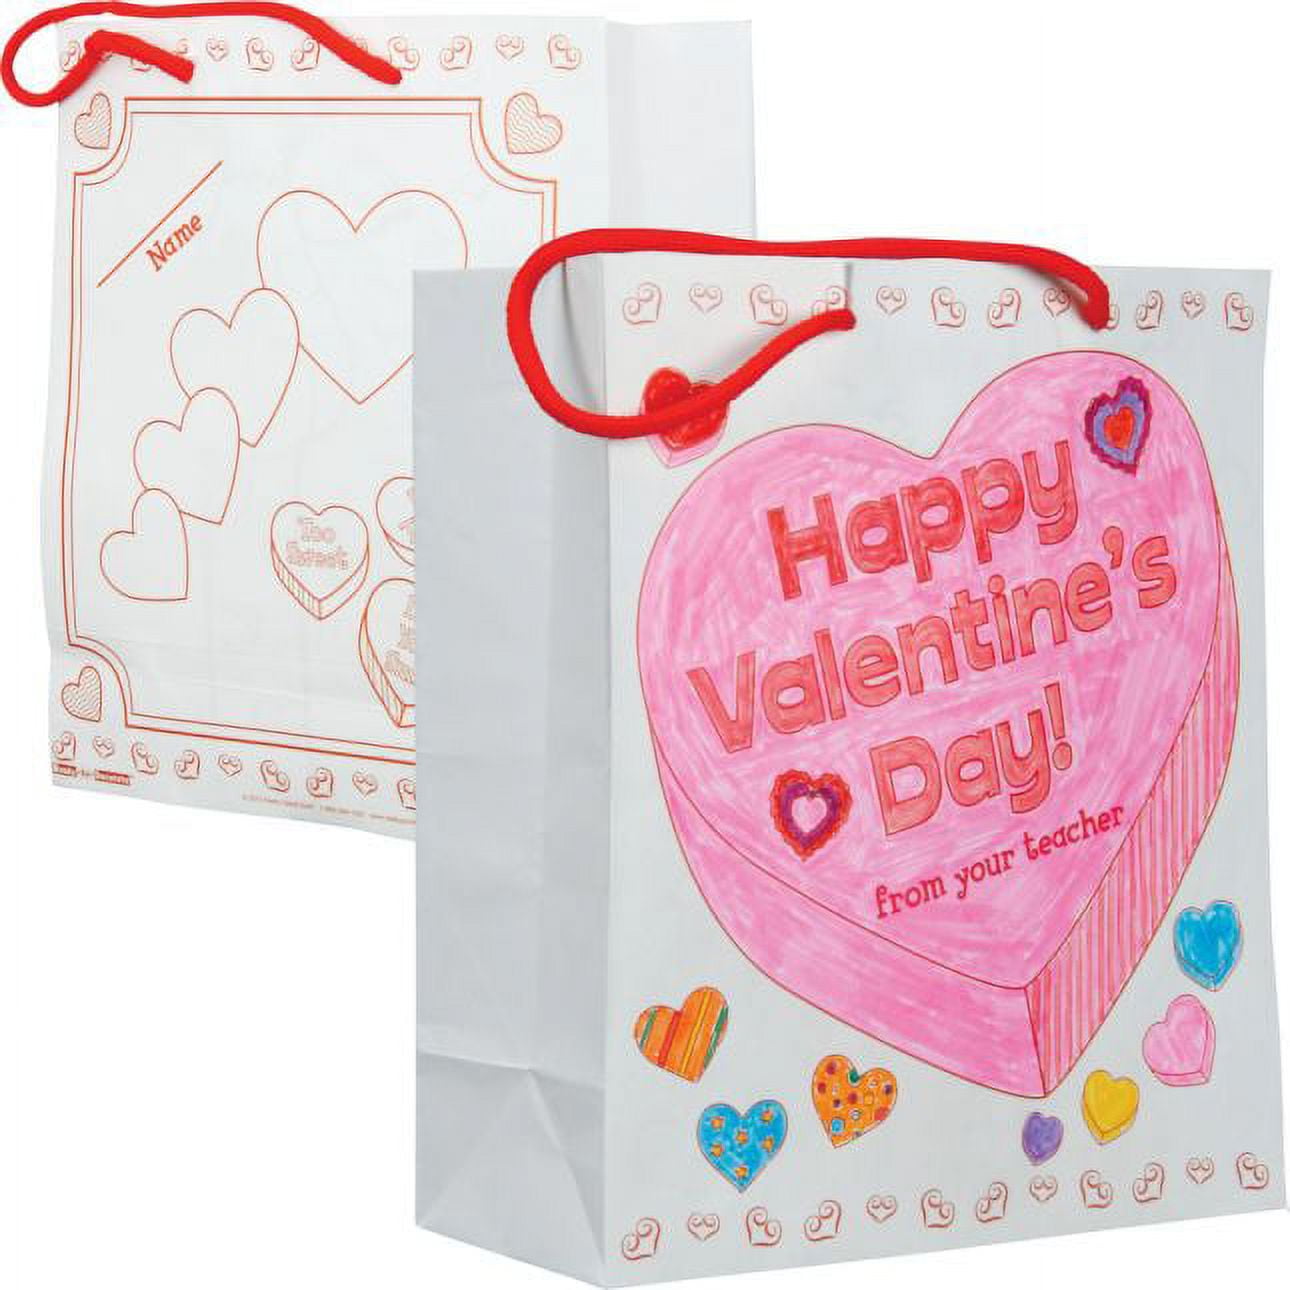 Valentines Day Cards for Kids - 35Pcs Desserts Kids Valentines Cards With  Cute Pendants in 7 Different Patterns, Perfect Valentines Day Gift Cards  for